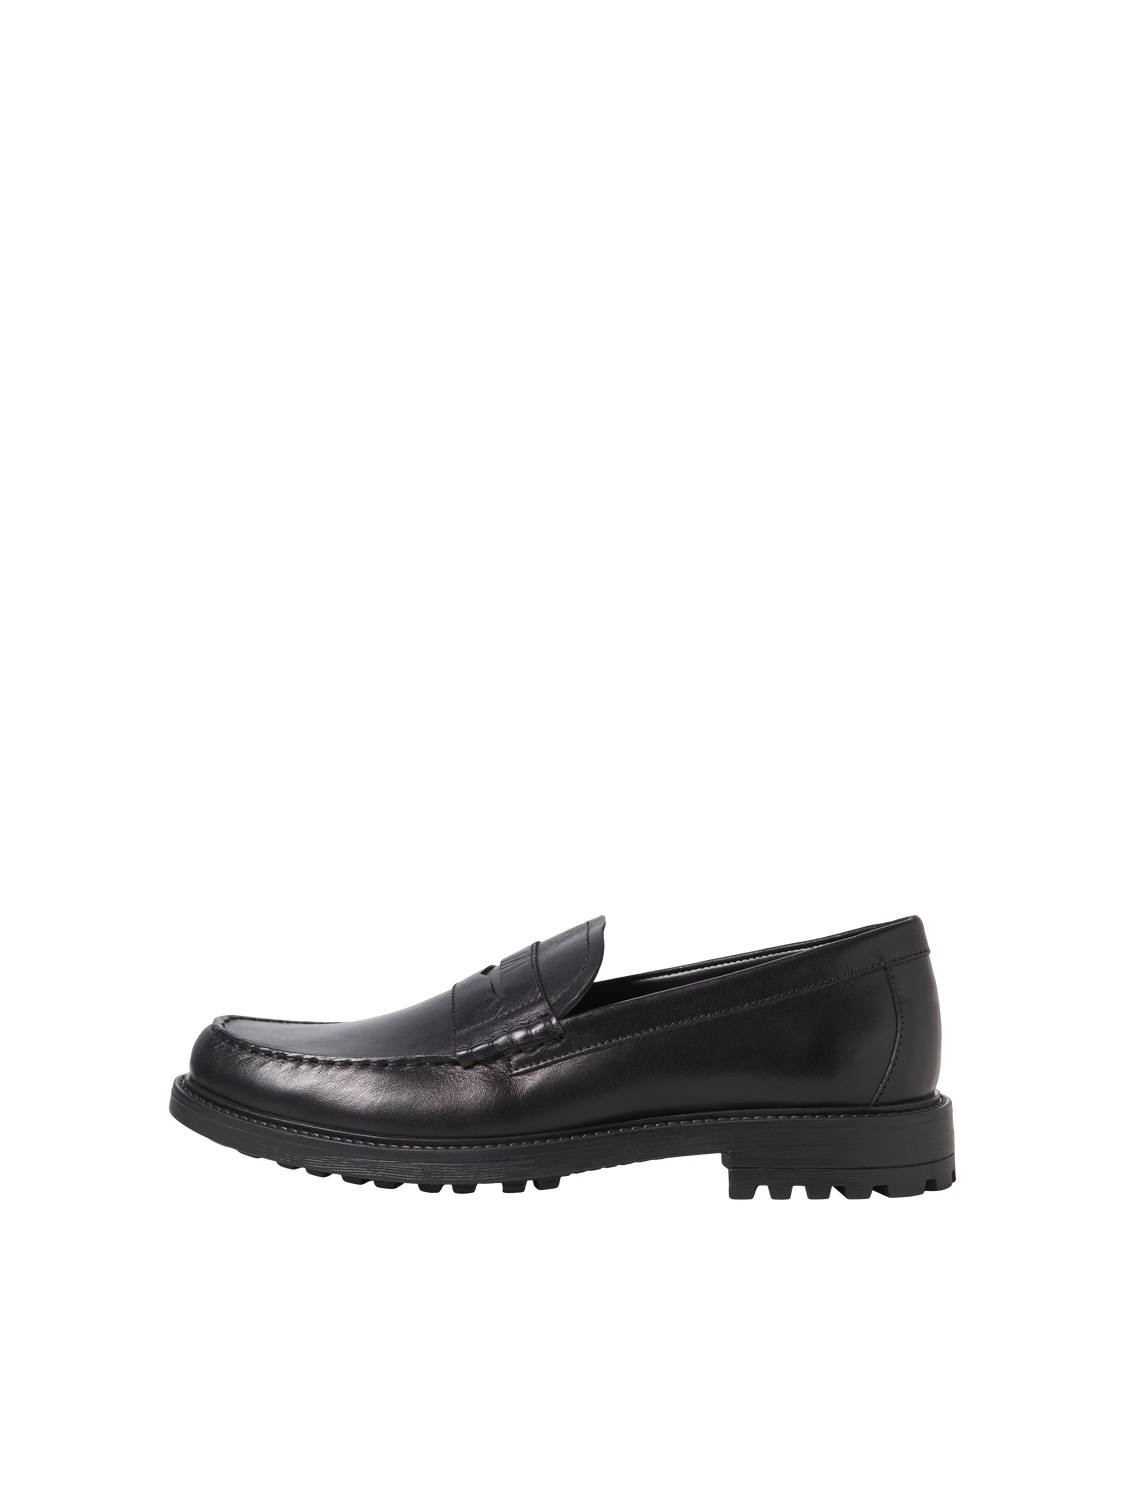 JFWTIM Shoes - Anthracite